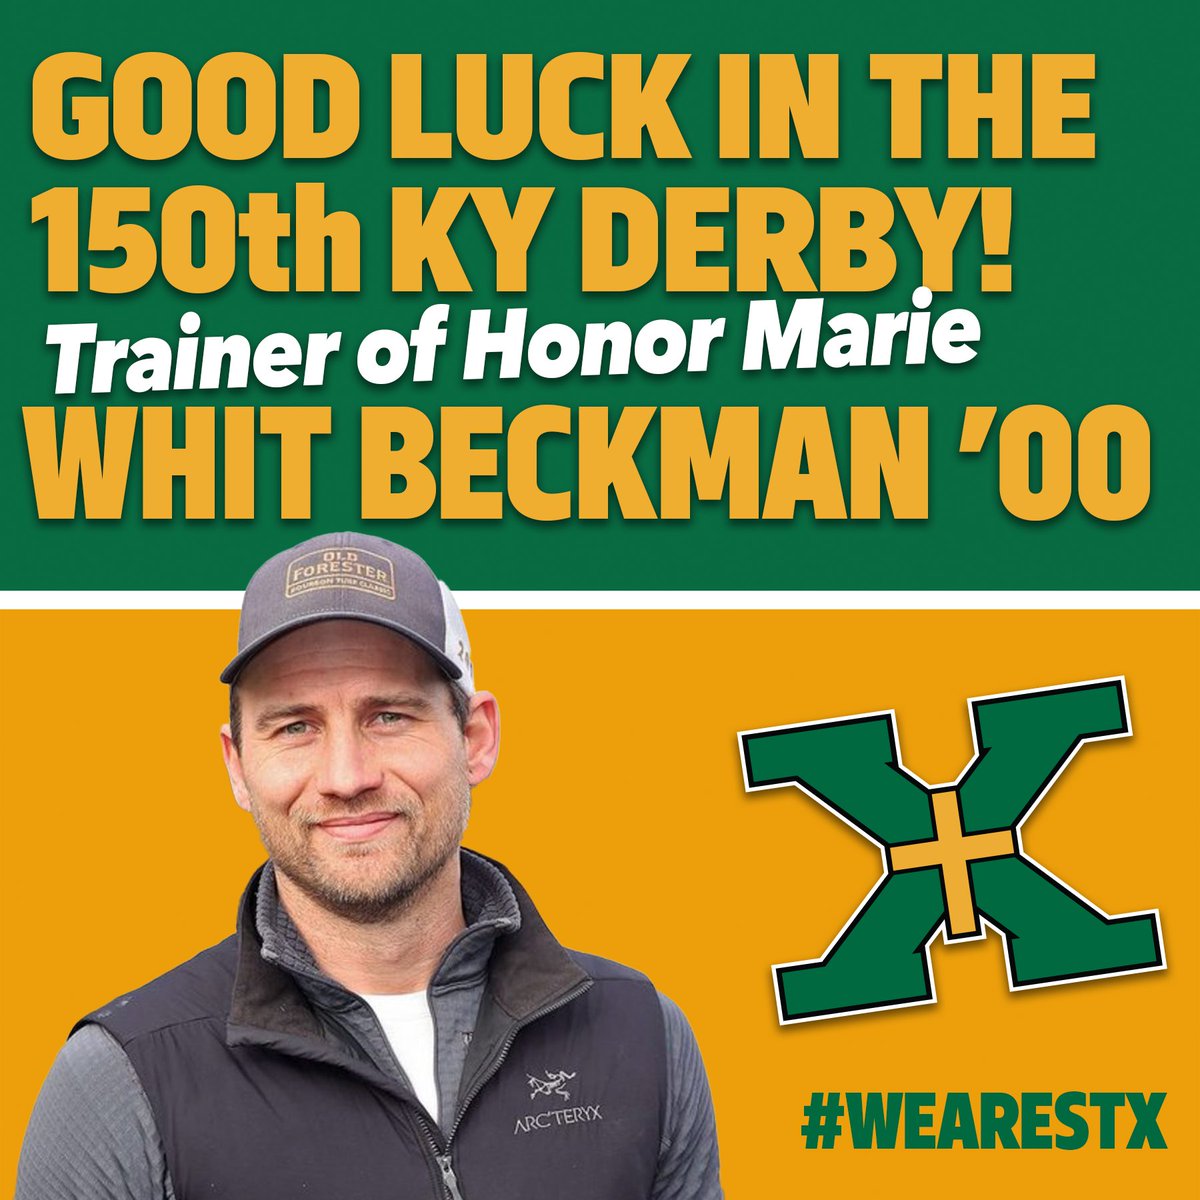 Best of luck to Whit Beckman '00, trainer of Honor Marie, in the 150th Kentucky Derby! #WeAreStX #KyDerby